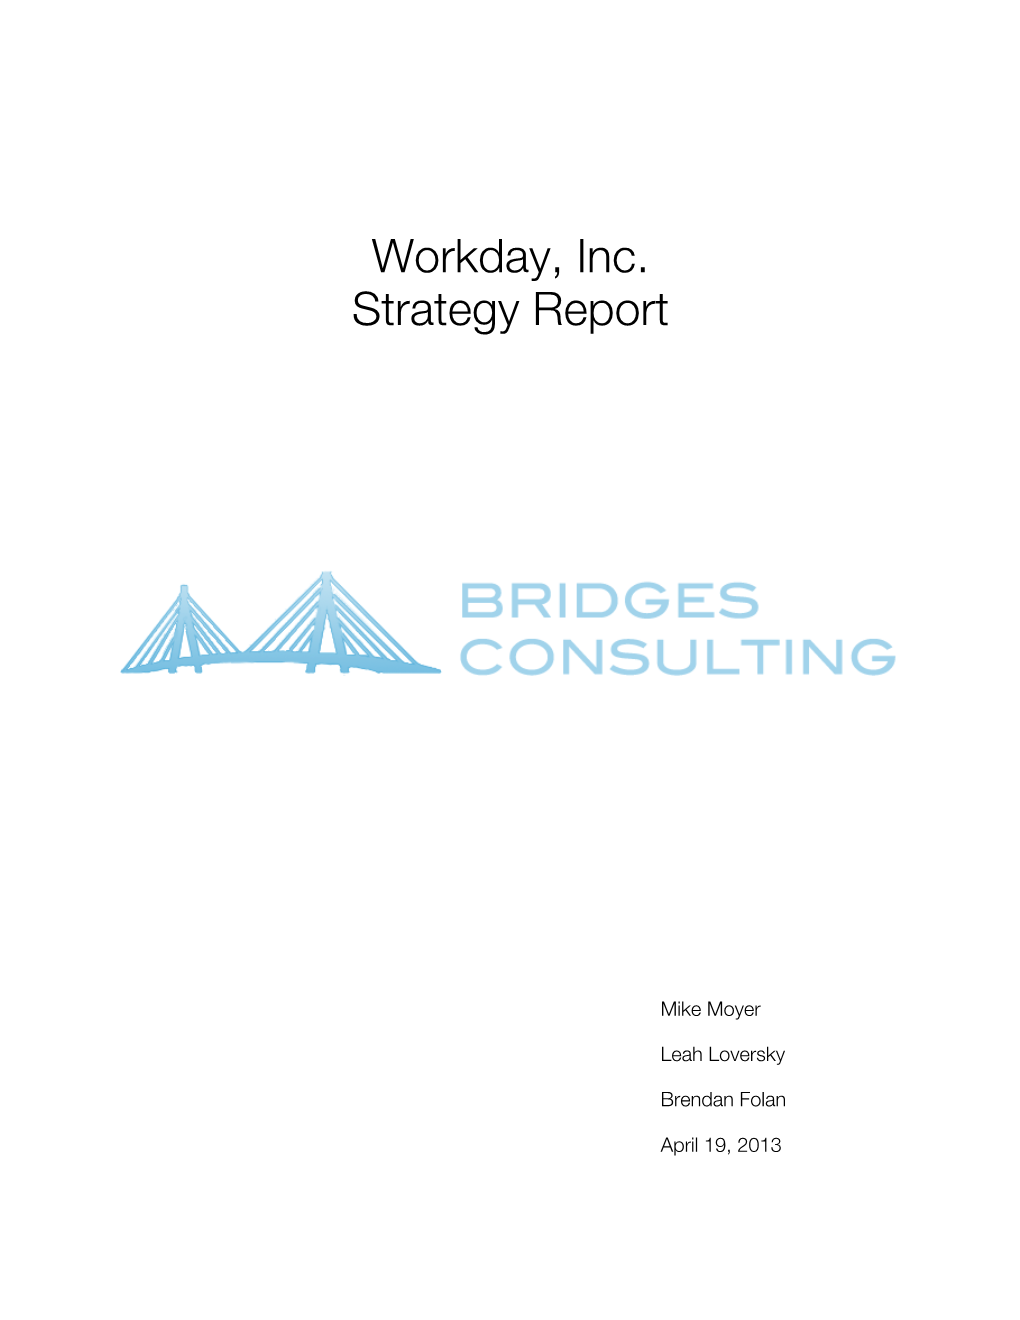 Workday, Inc. Strategy Report